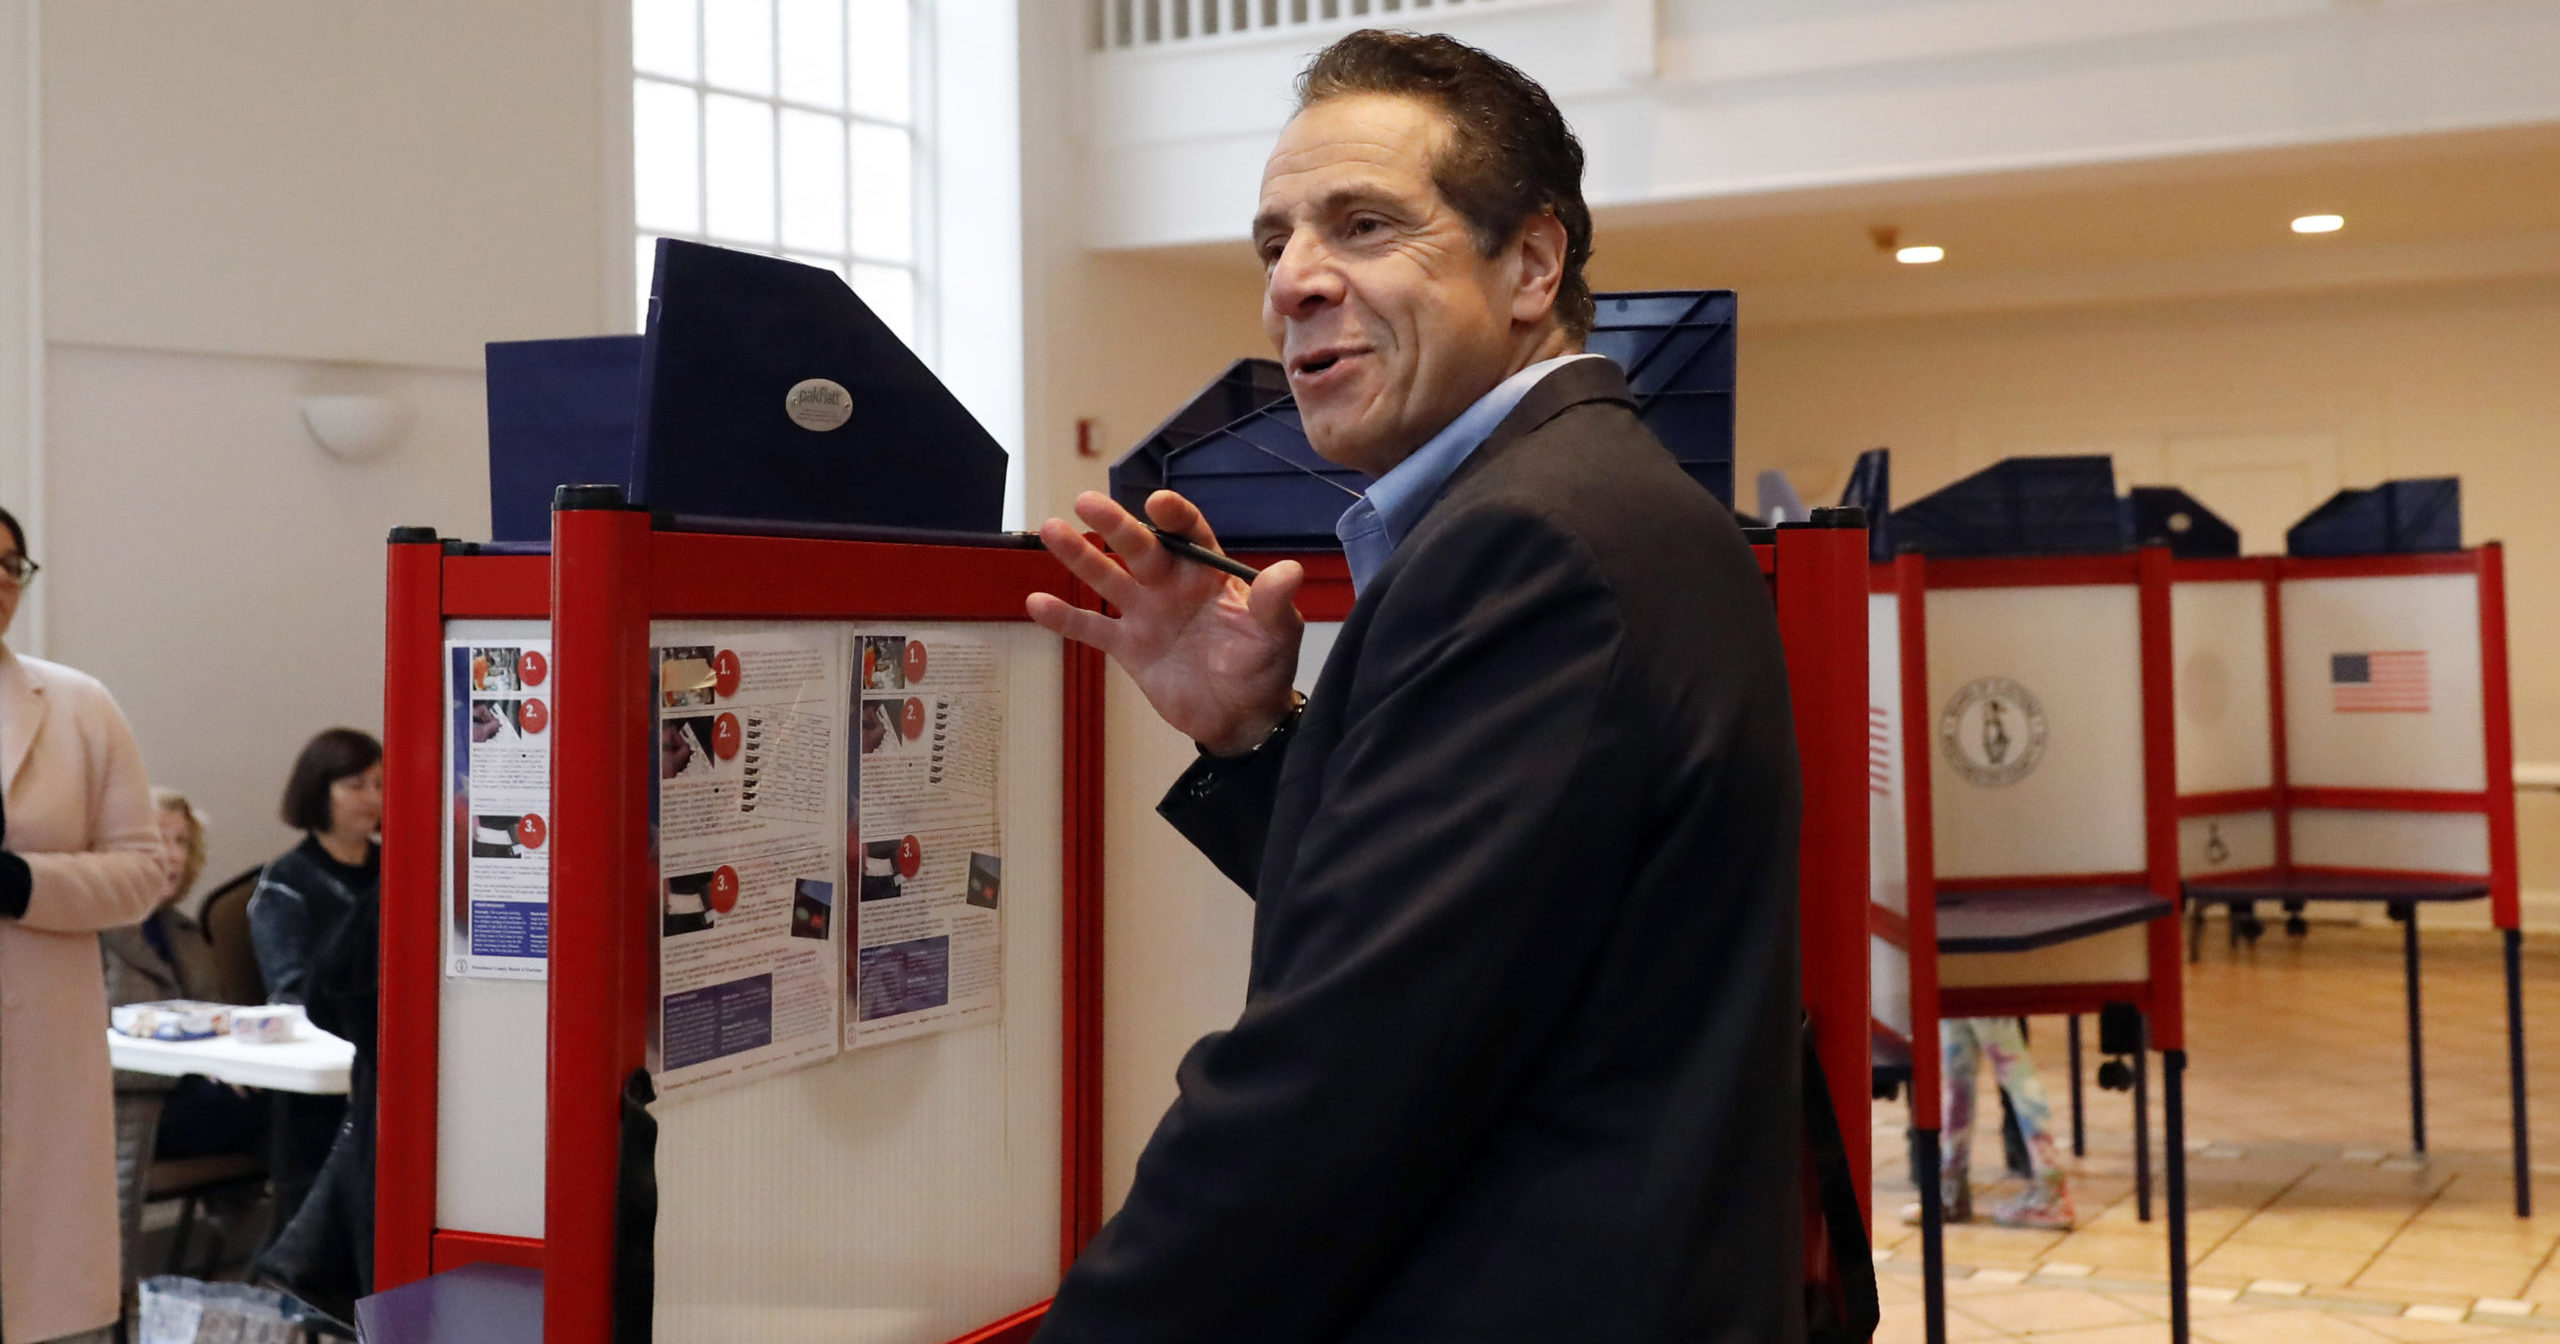 New York Gov. Andrew Cuomo fills out a ballot at the Presbyterian Church of Mount Kisco in Mt. Kisco, New York, on Nov. 6, 2018.